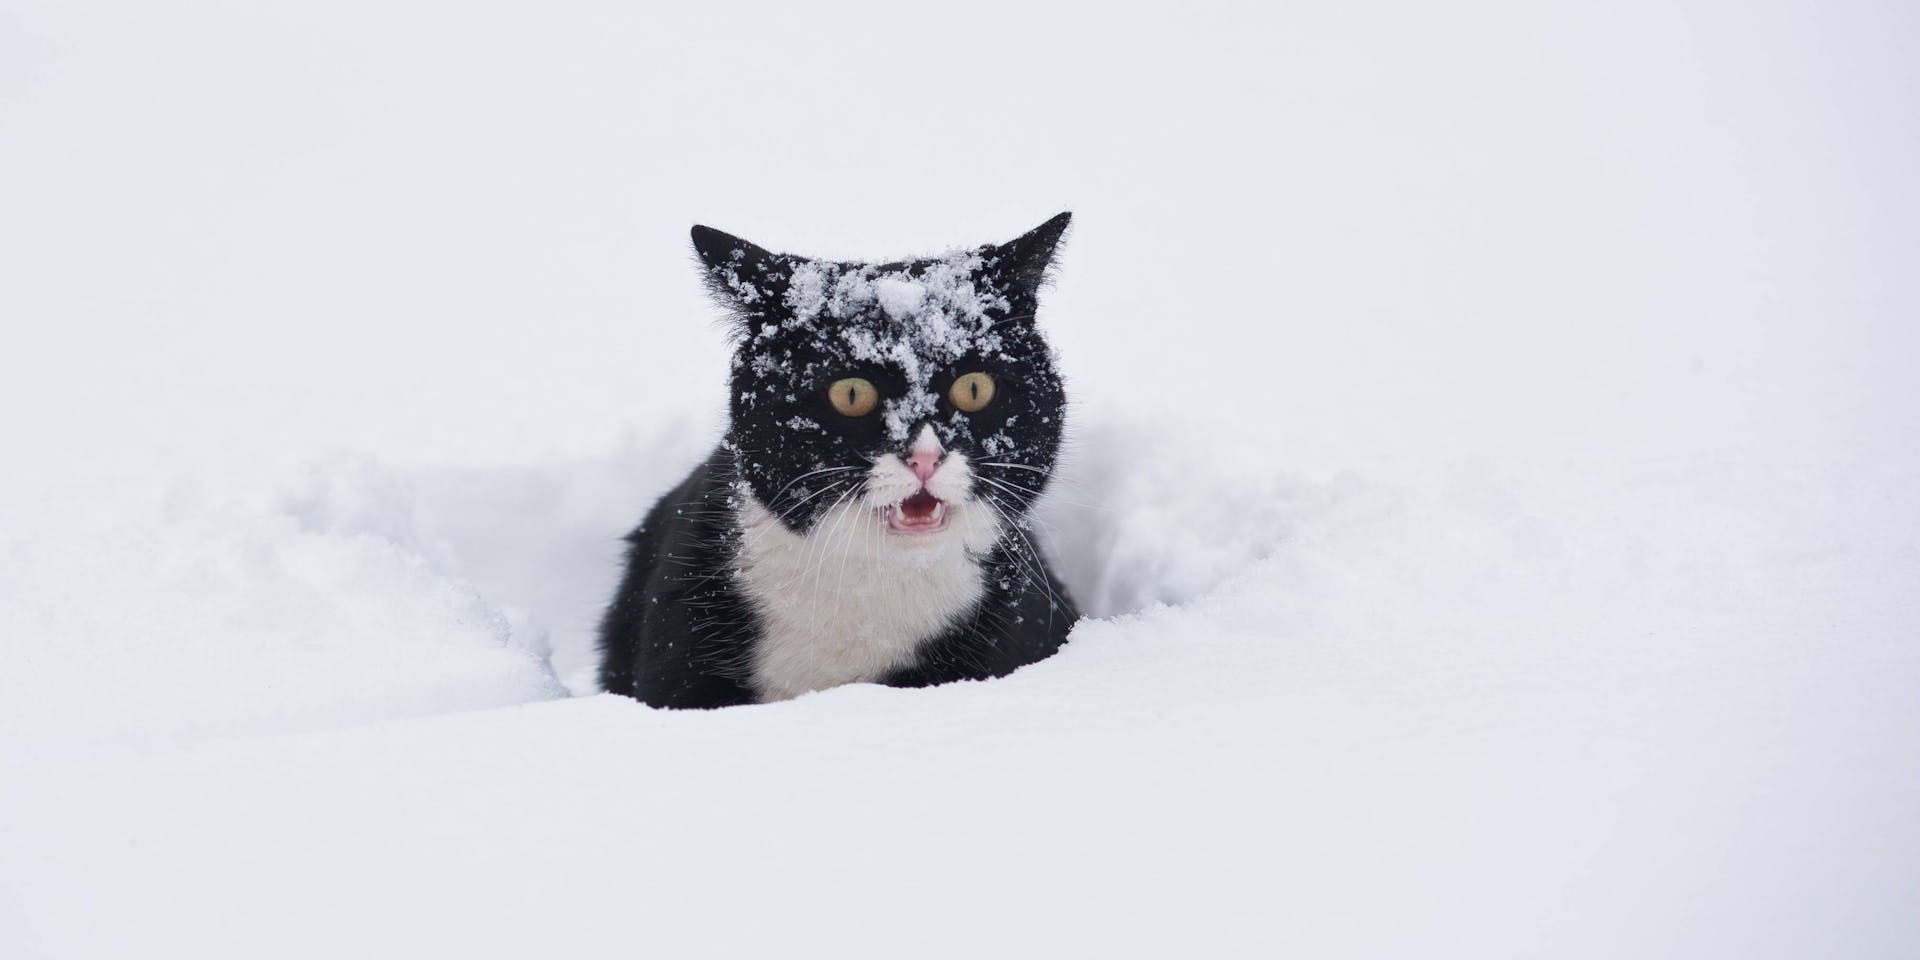 A black and white cat playing in the winter snow.